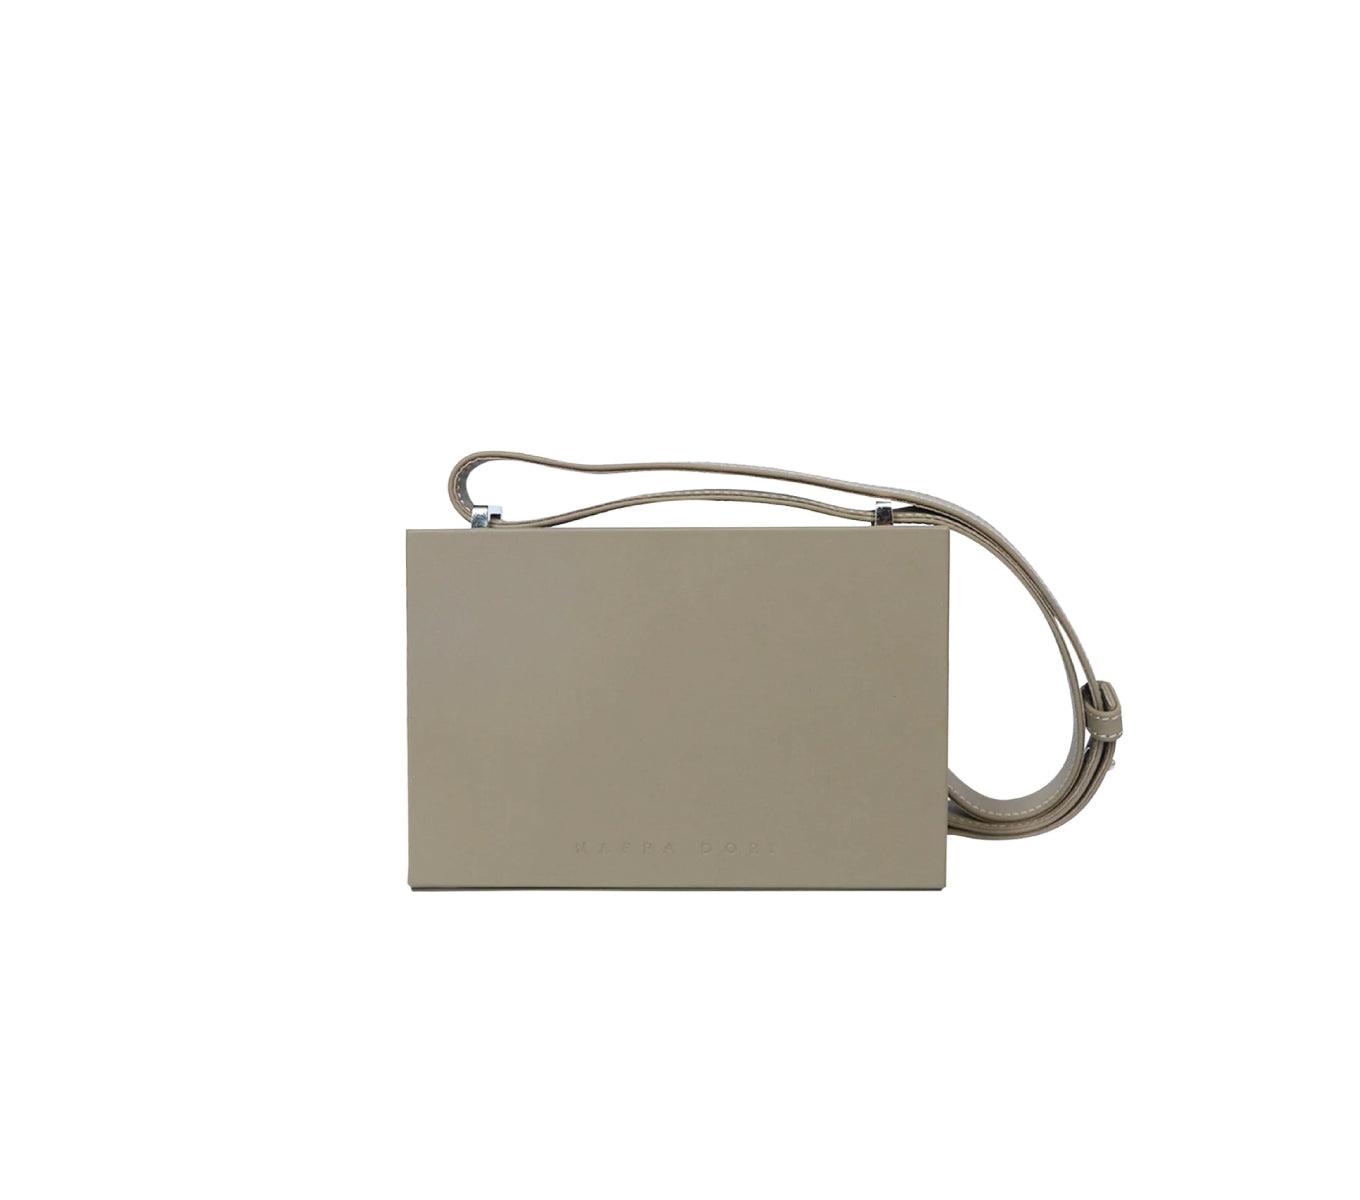 peter do brushed card case - その他